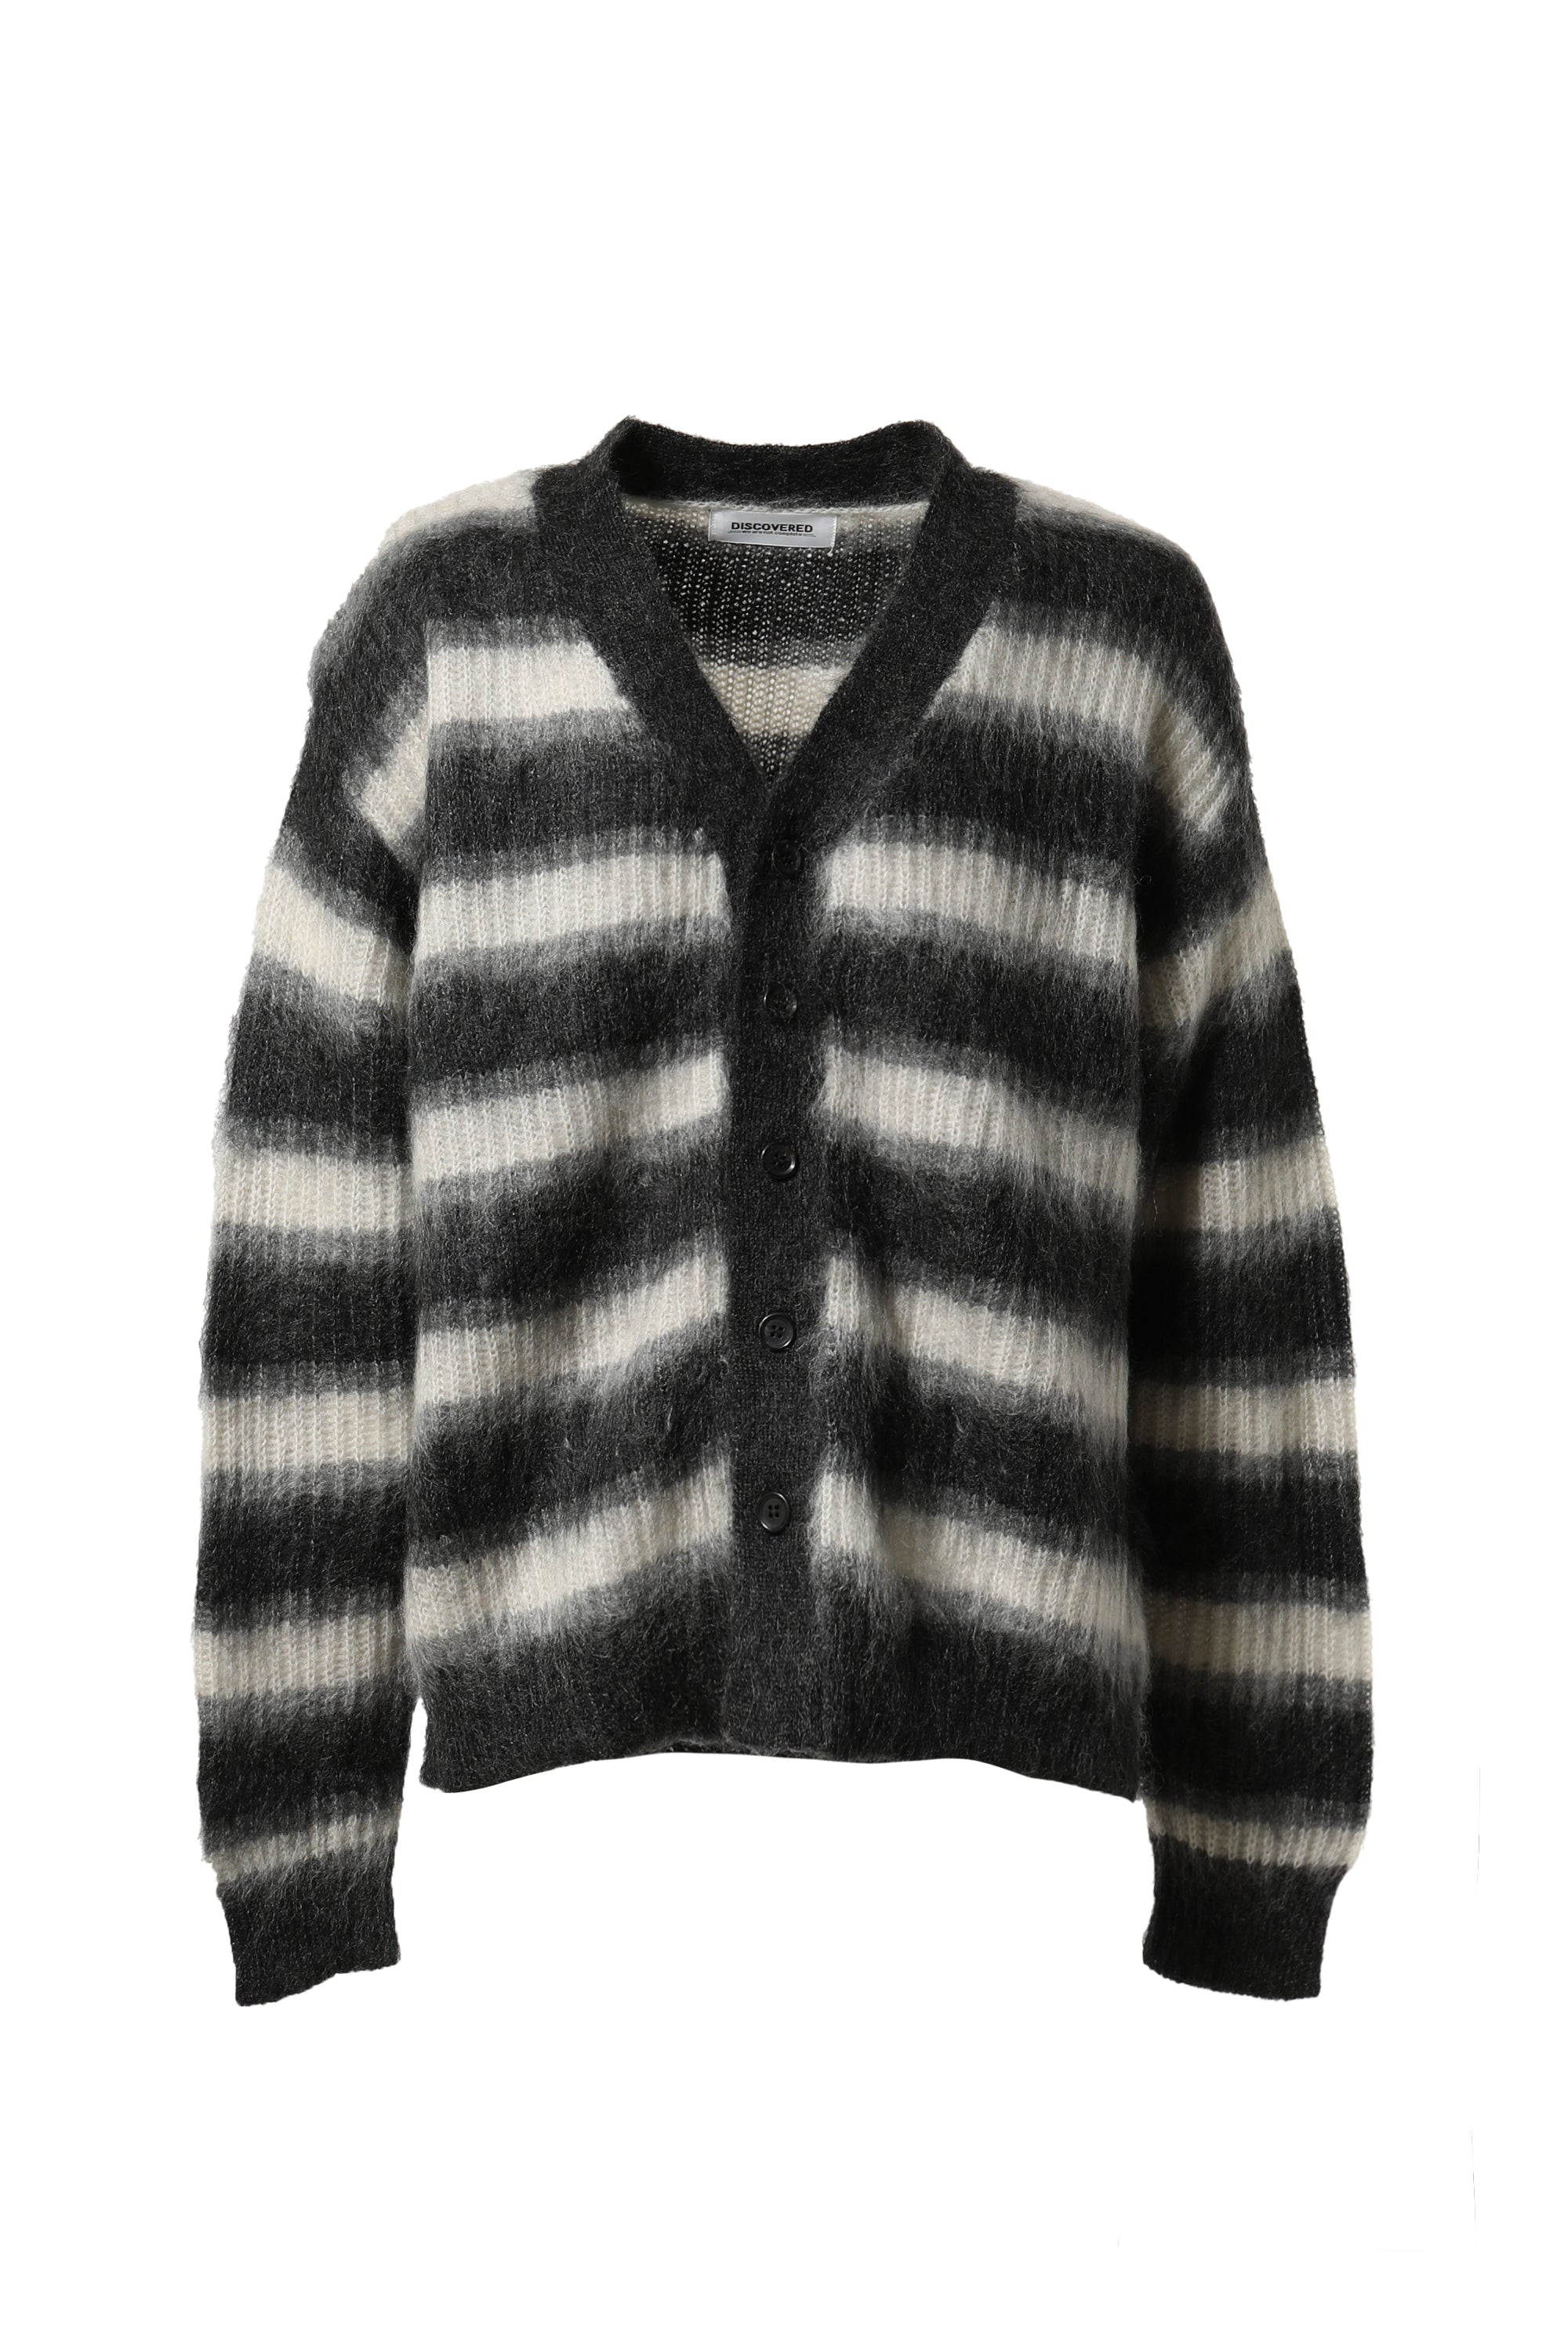 DISCOVERED FW22 MOHAIR BORDER KNIT CARDIGAN